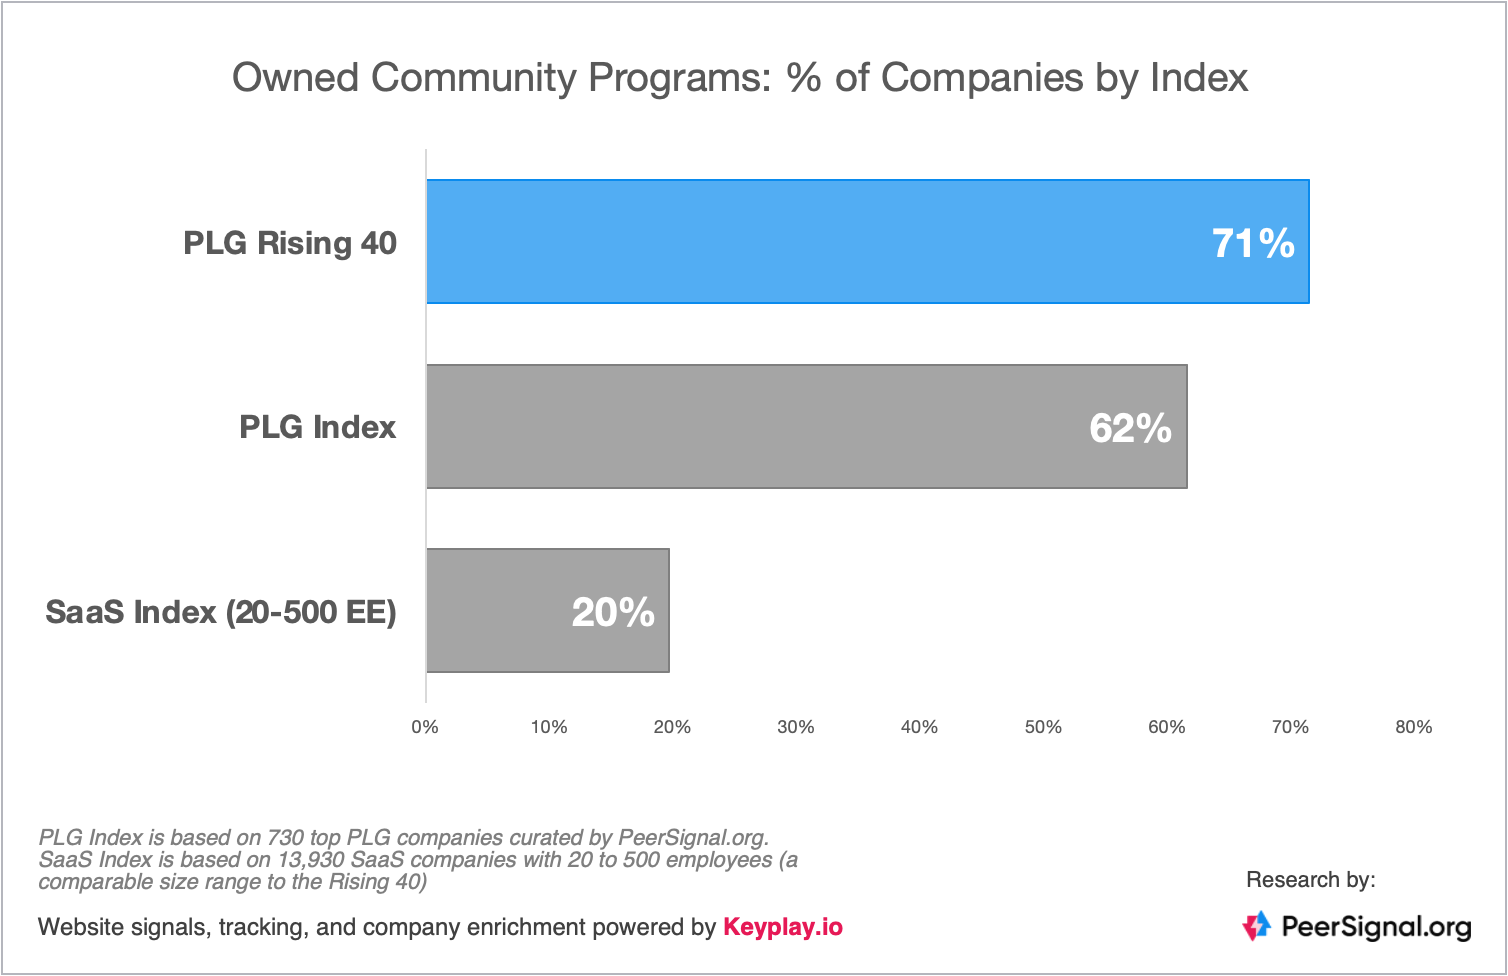 Image of chart showing owned community programs among companies